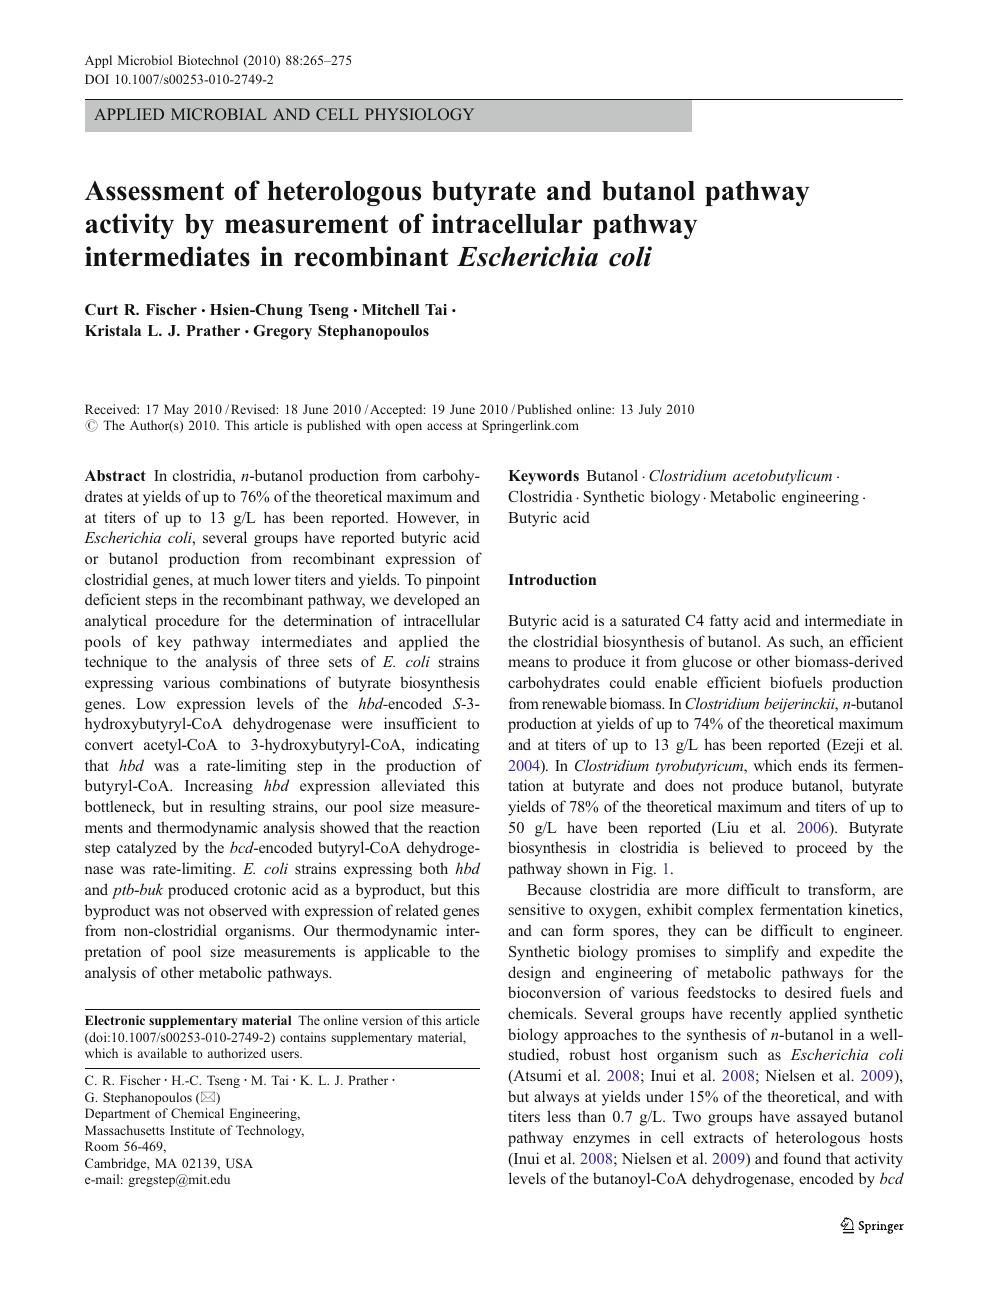 Assessment Of Heterologous Butyrate And Butanol Pathway Activity